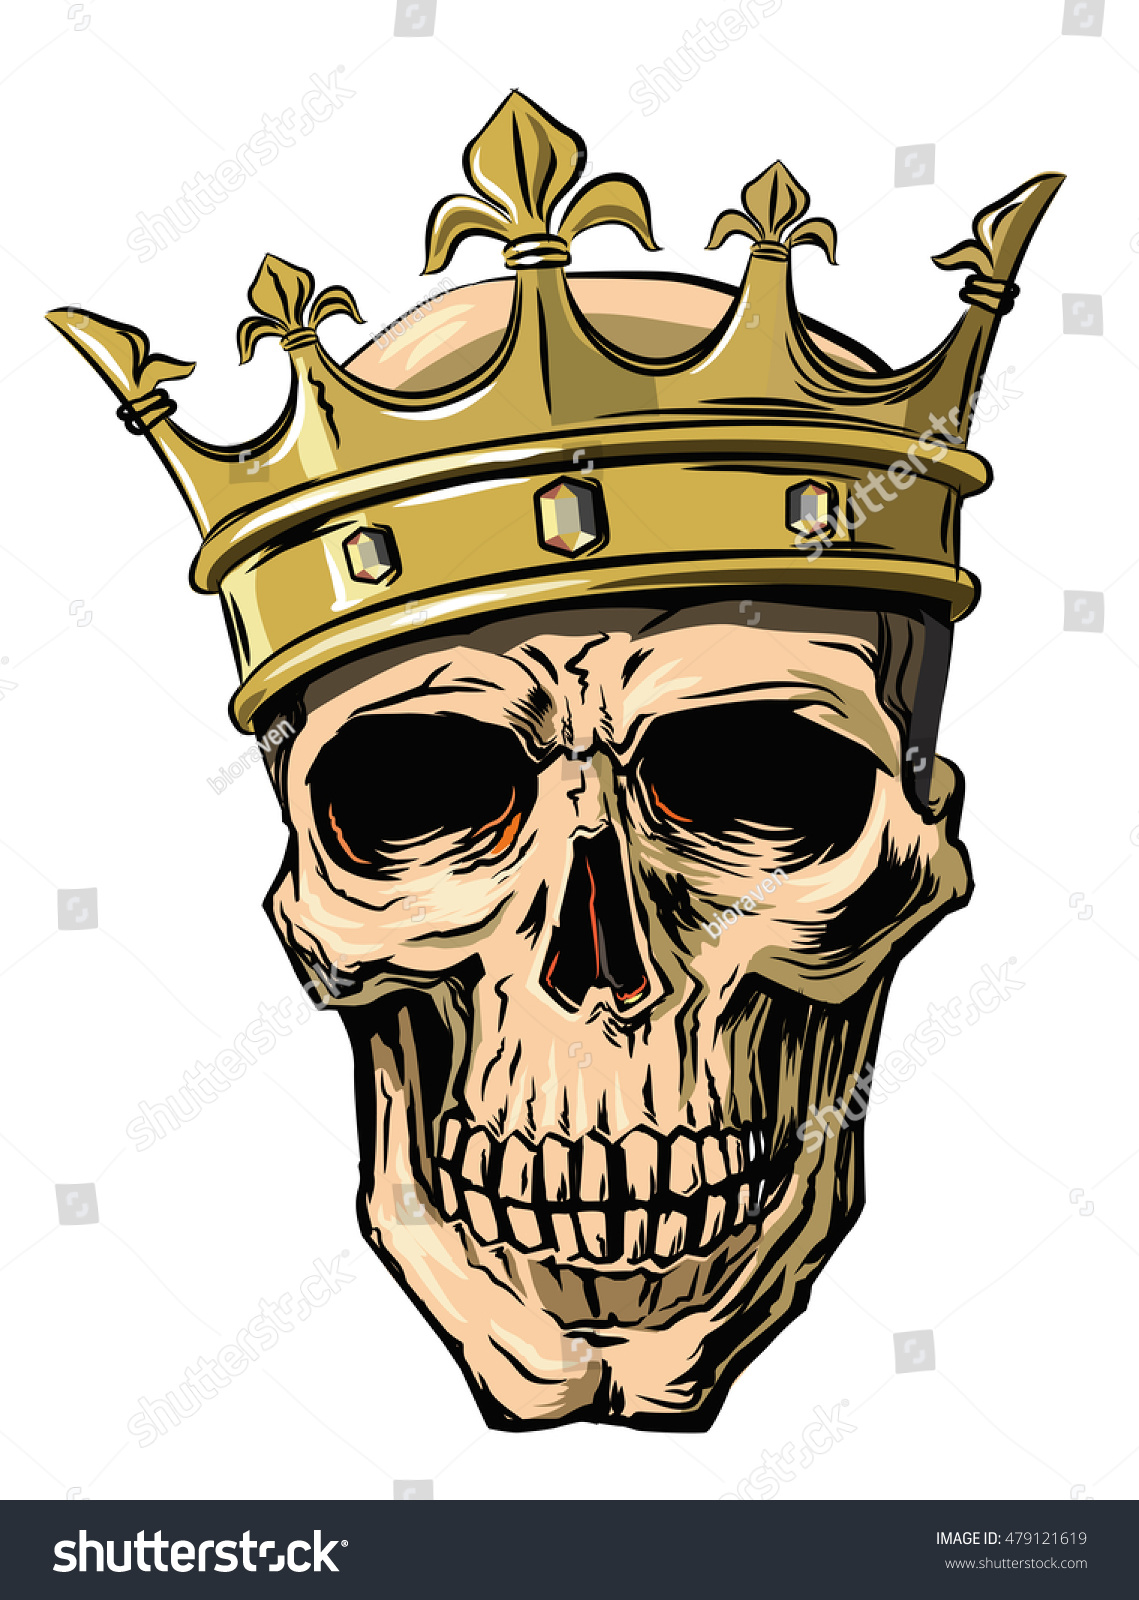 Download Vector Skull Crown On White Background Stock Vector ...